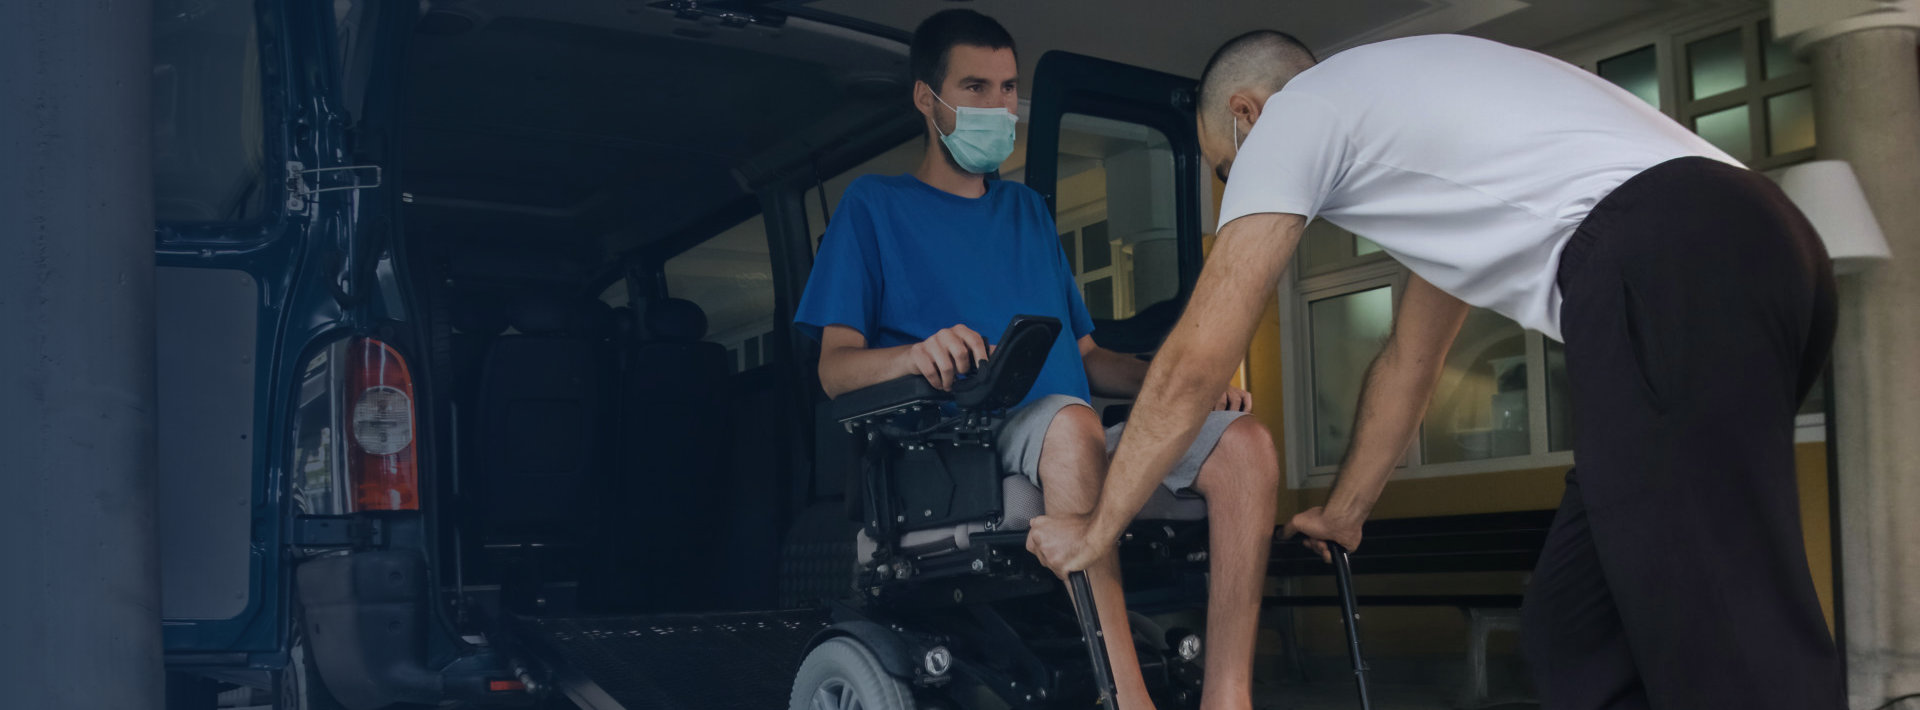 disabled man being assisted into the transportation vehicle